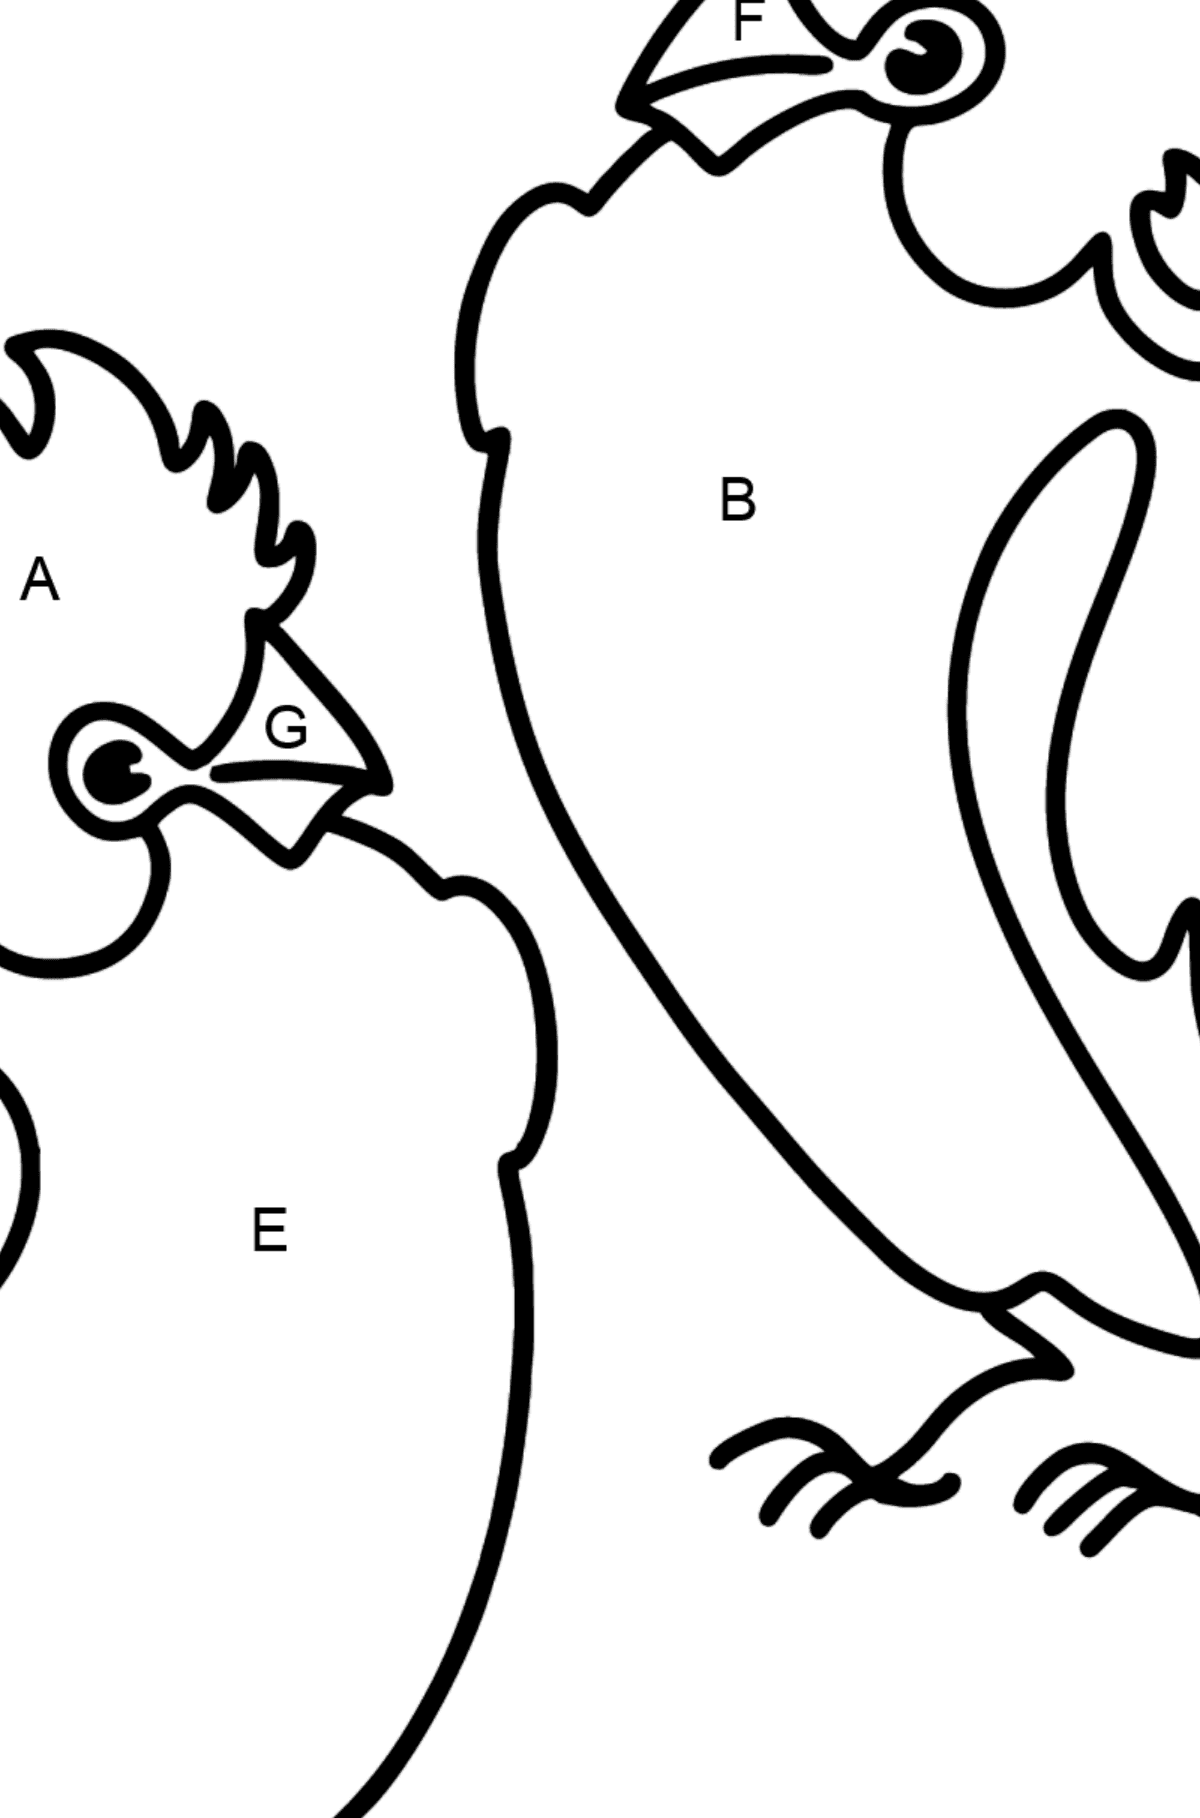 2 Parrots coloring page - Coloring by Letters for Kids